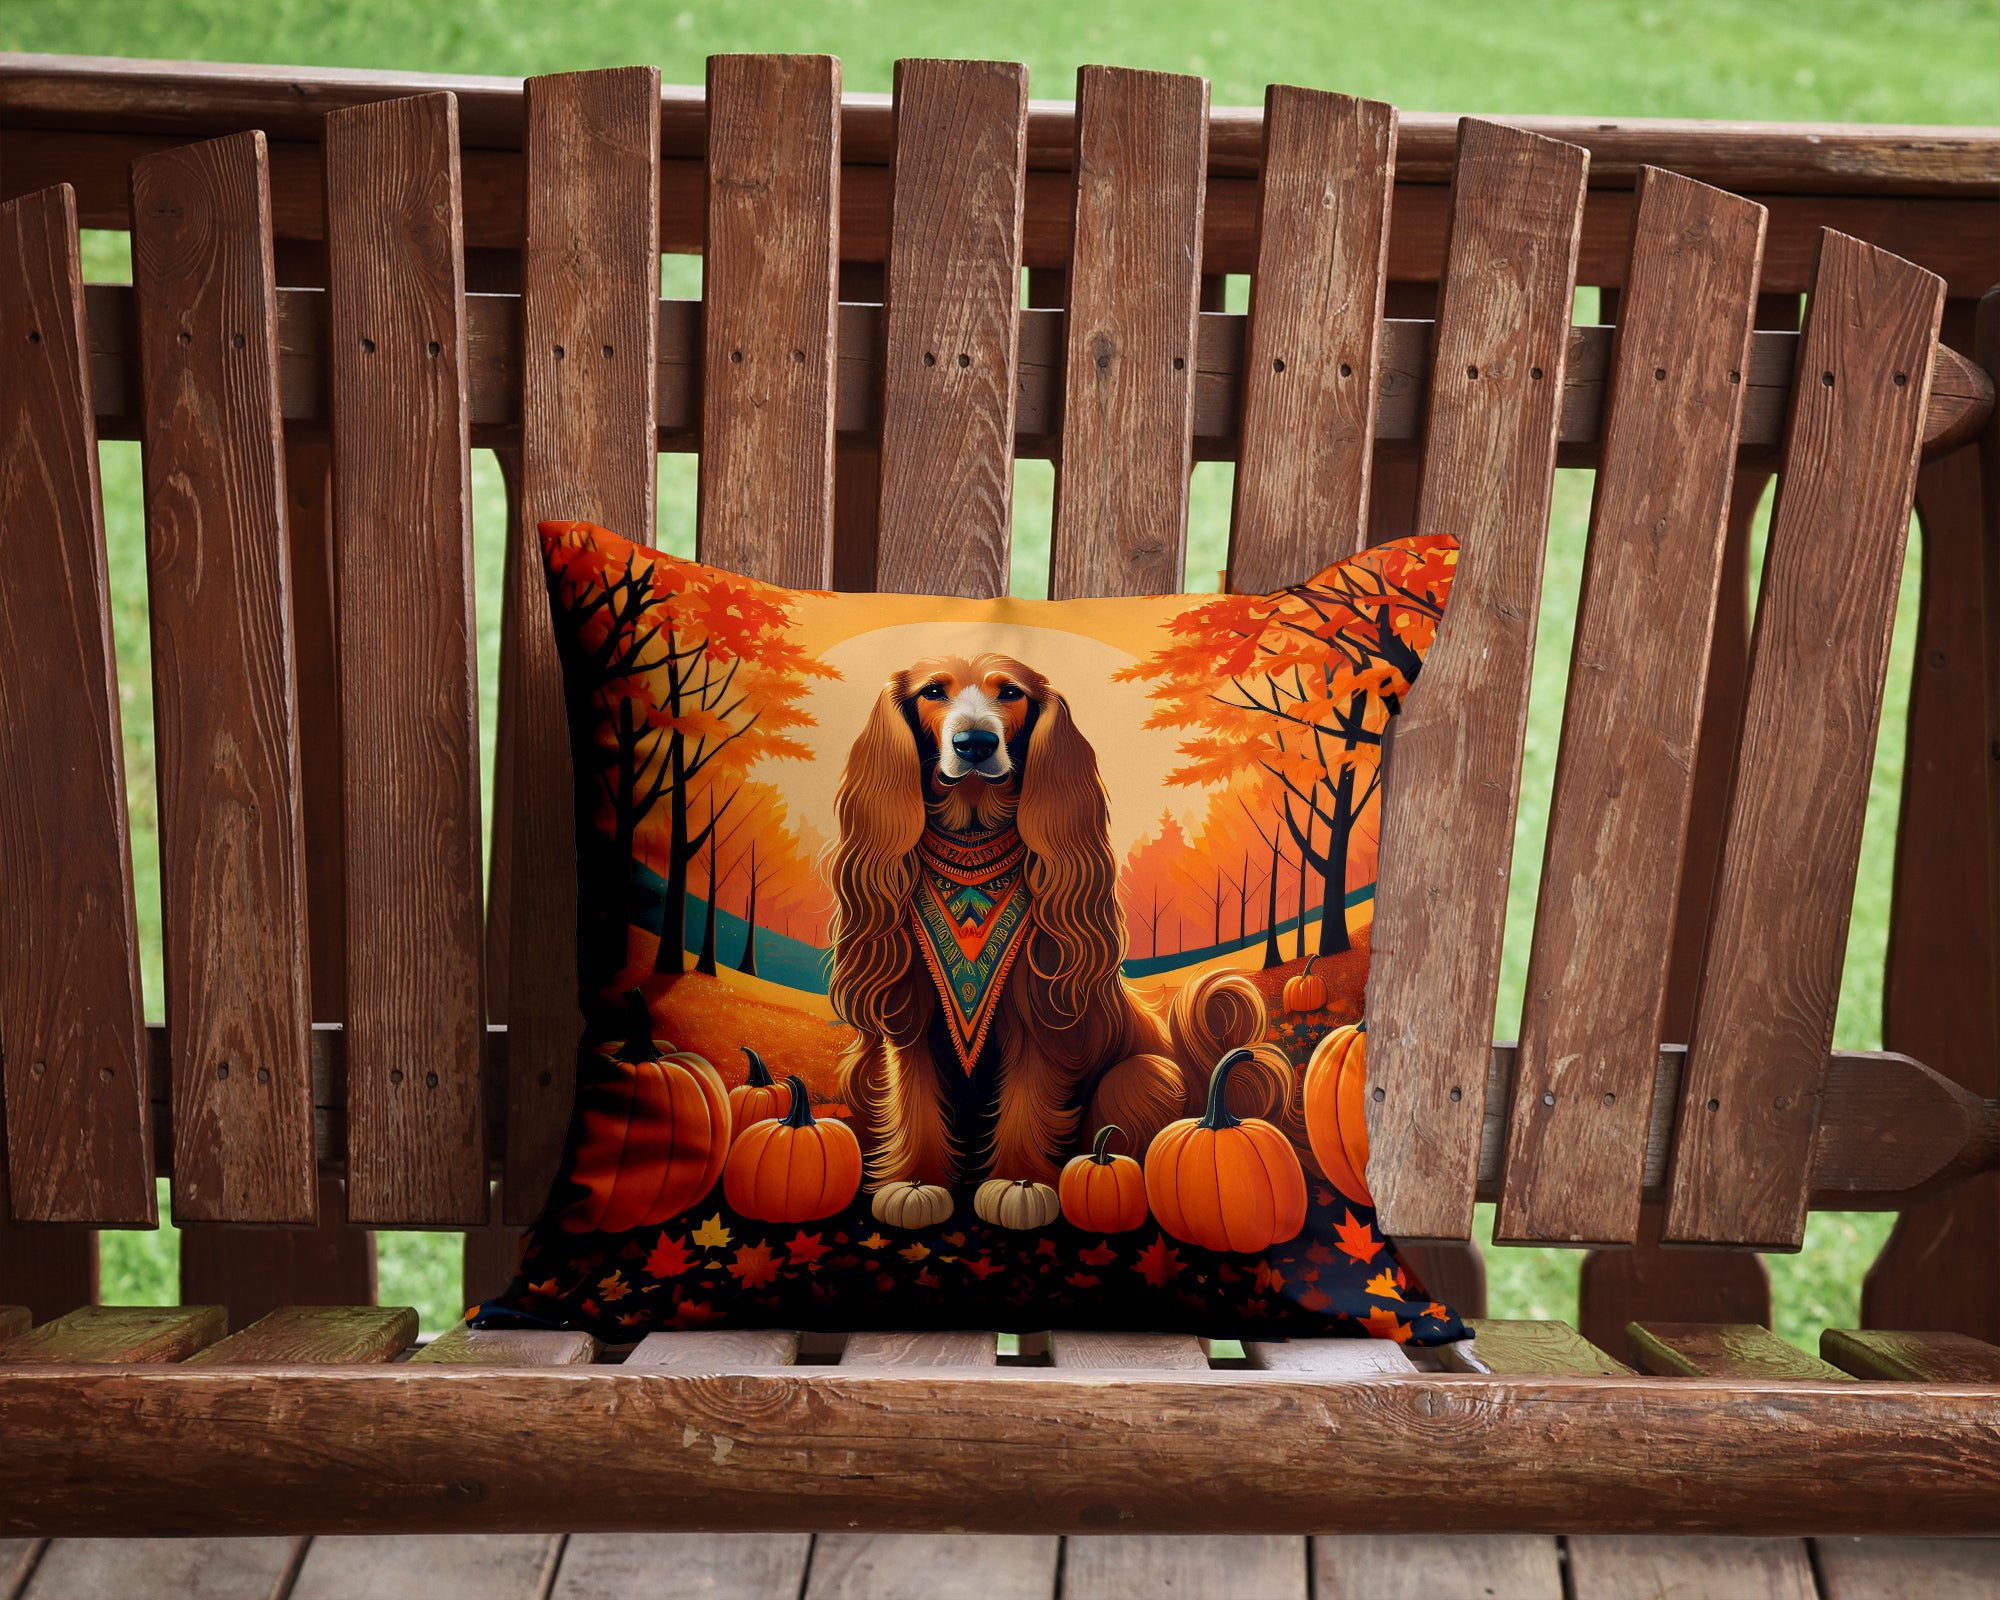 Buy this Afghan Hound Fall Fabric Decorative Pillow